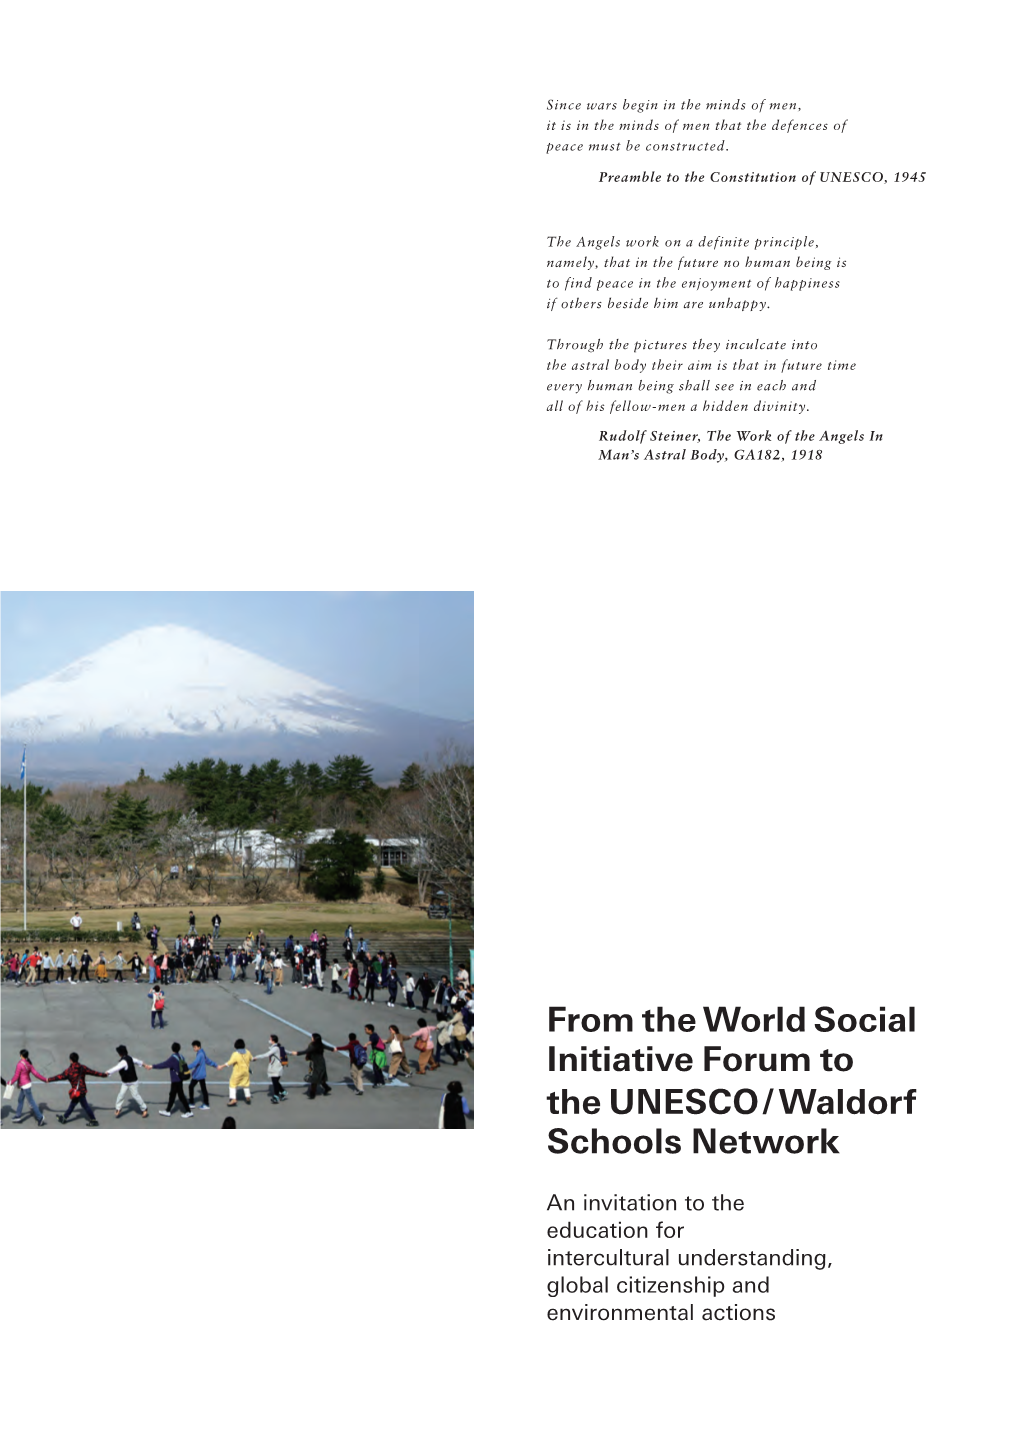 From the World Social Initiative Forum to the UNESCO / Waldorf Schools Network